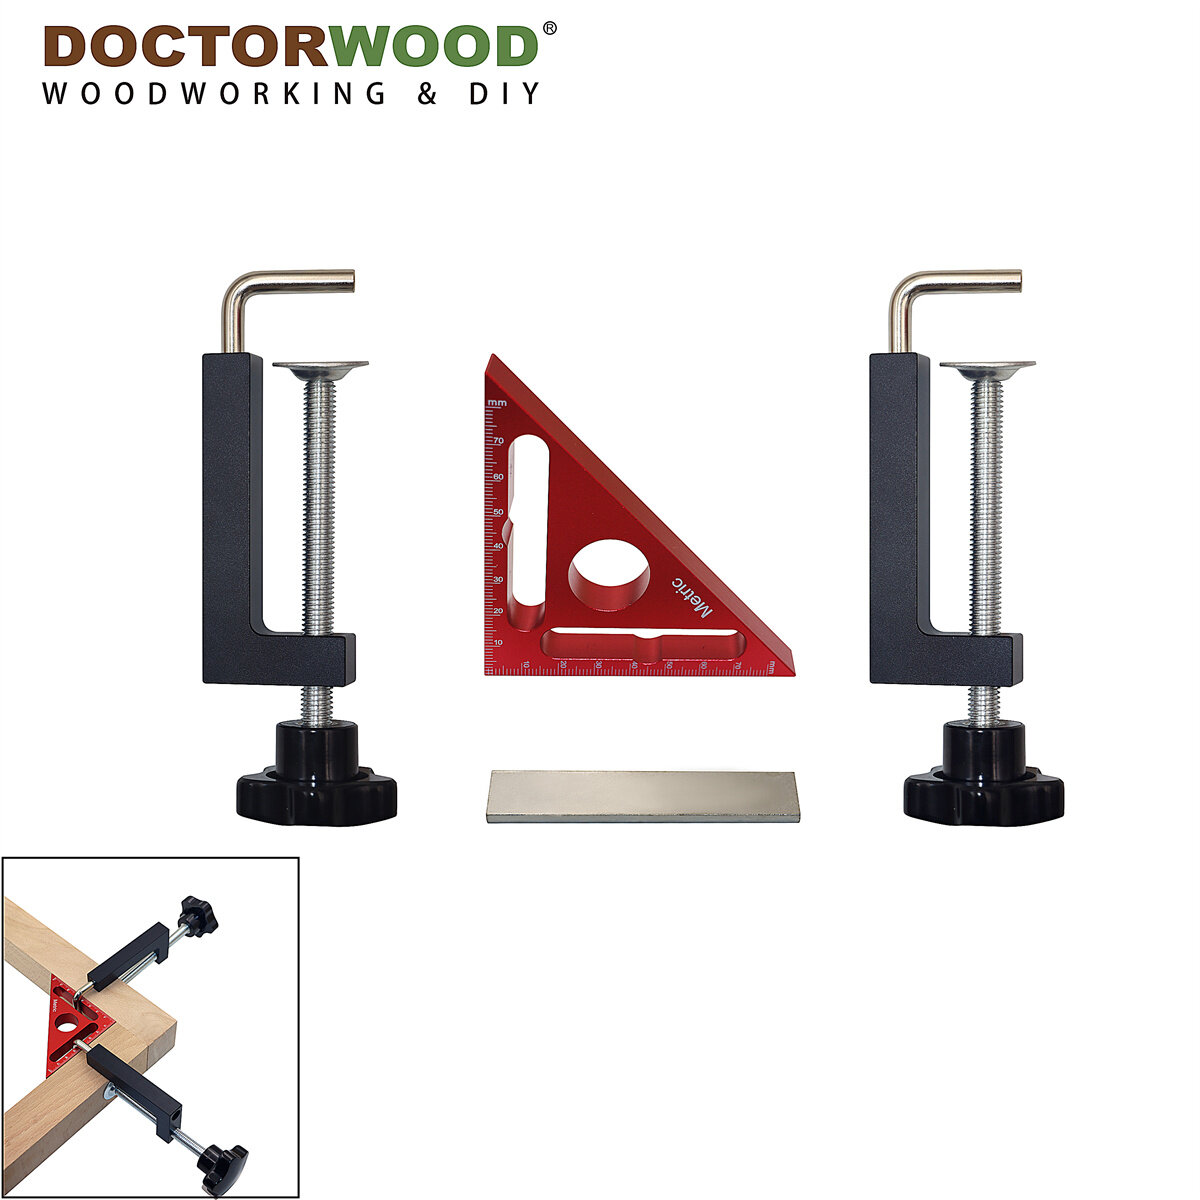 

WoodworkPro 90° Triangle Ruler with Positioning BlockRight Angle Clamp Frame Clamp G-Clamp and Woodworking Tools for P